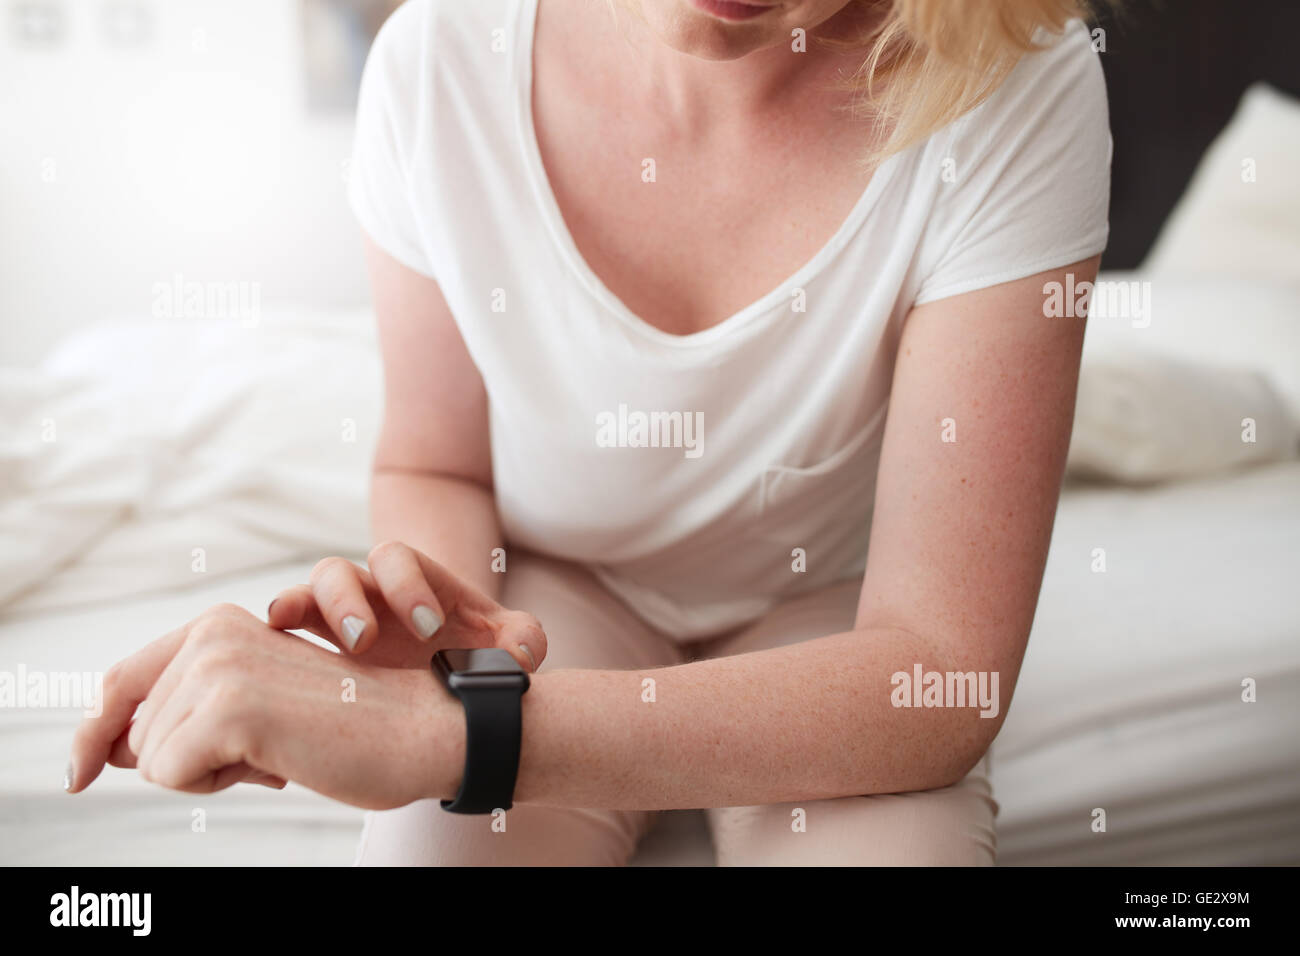 Closeup shot of caucasian female checking time on her wrist watch while sitting on bed at home. Stock Photo